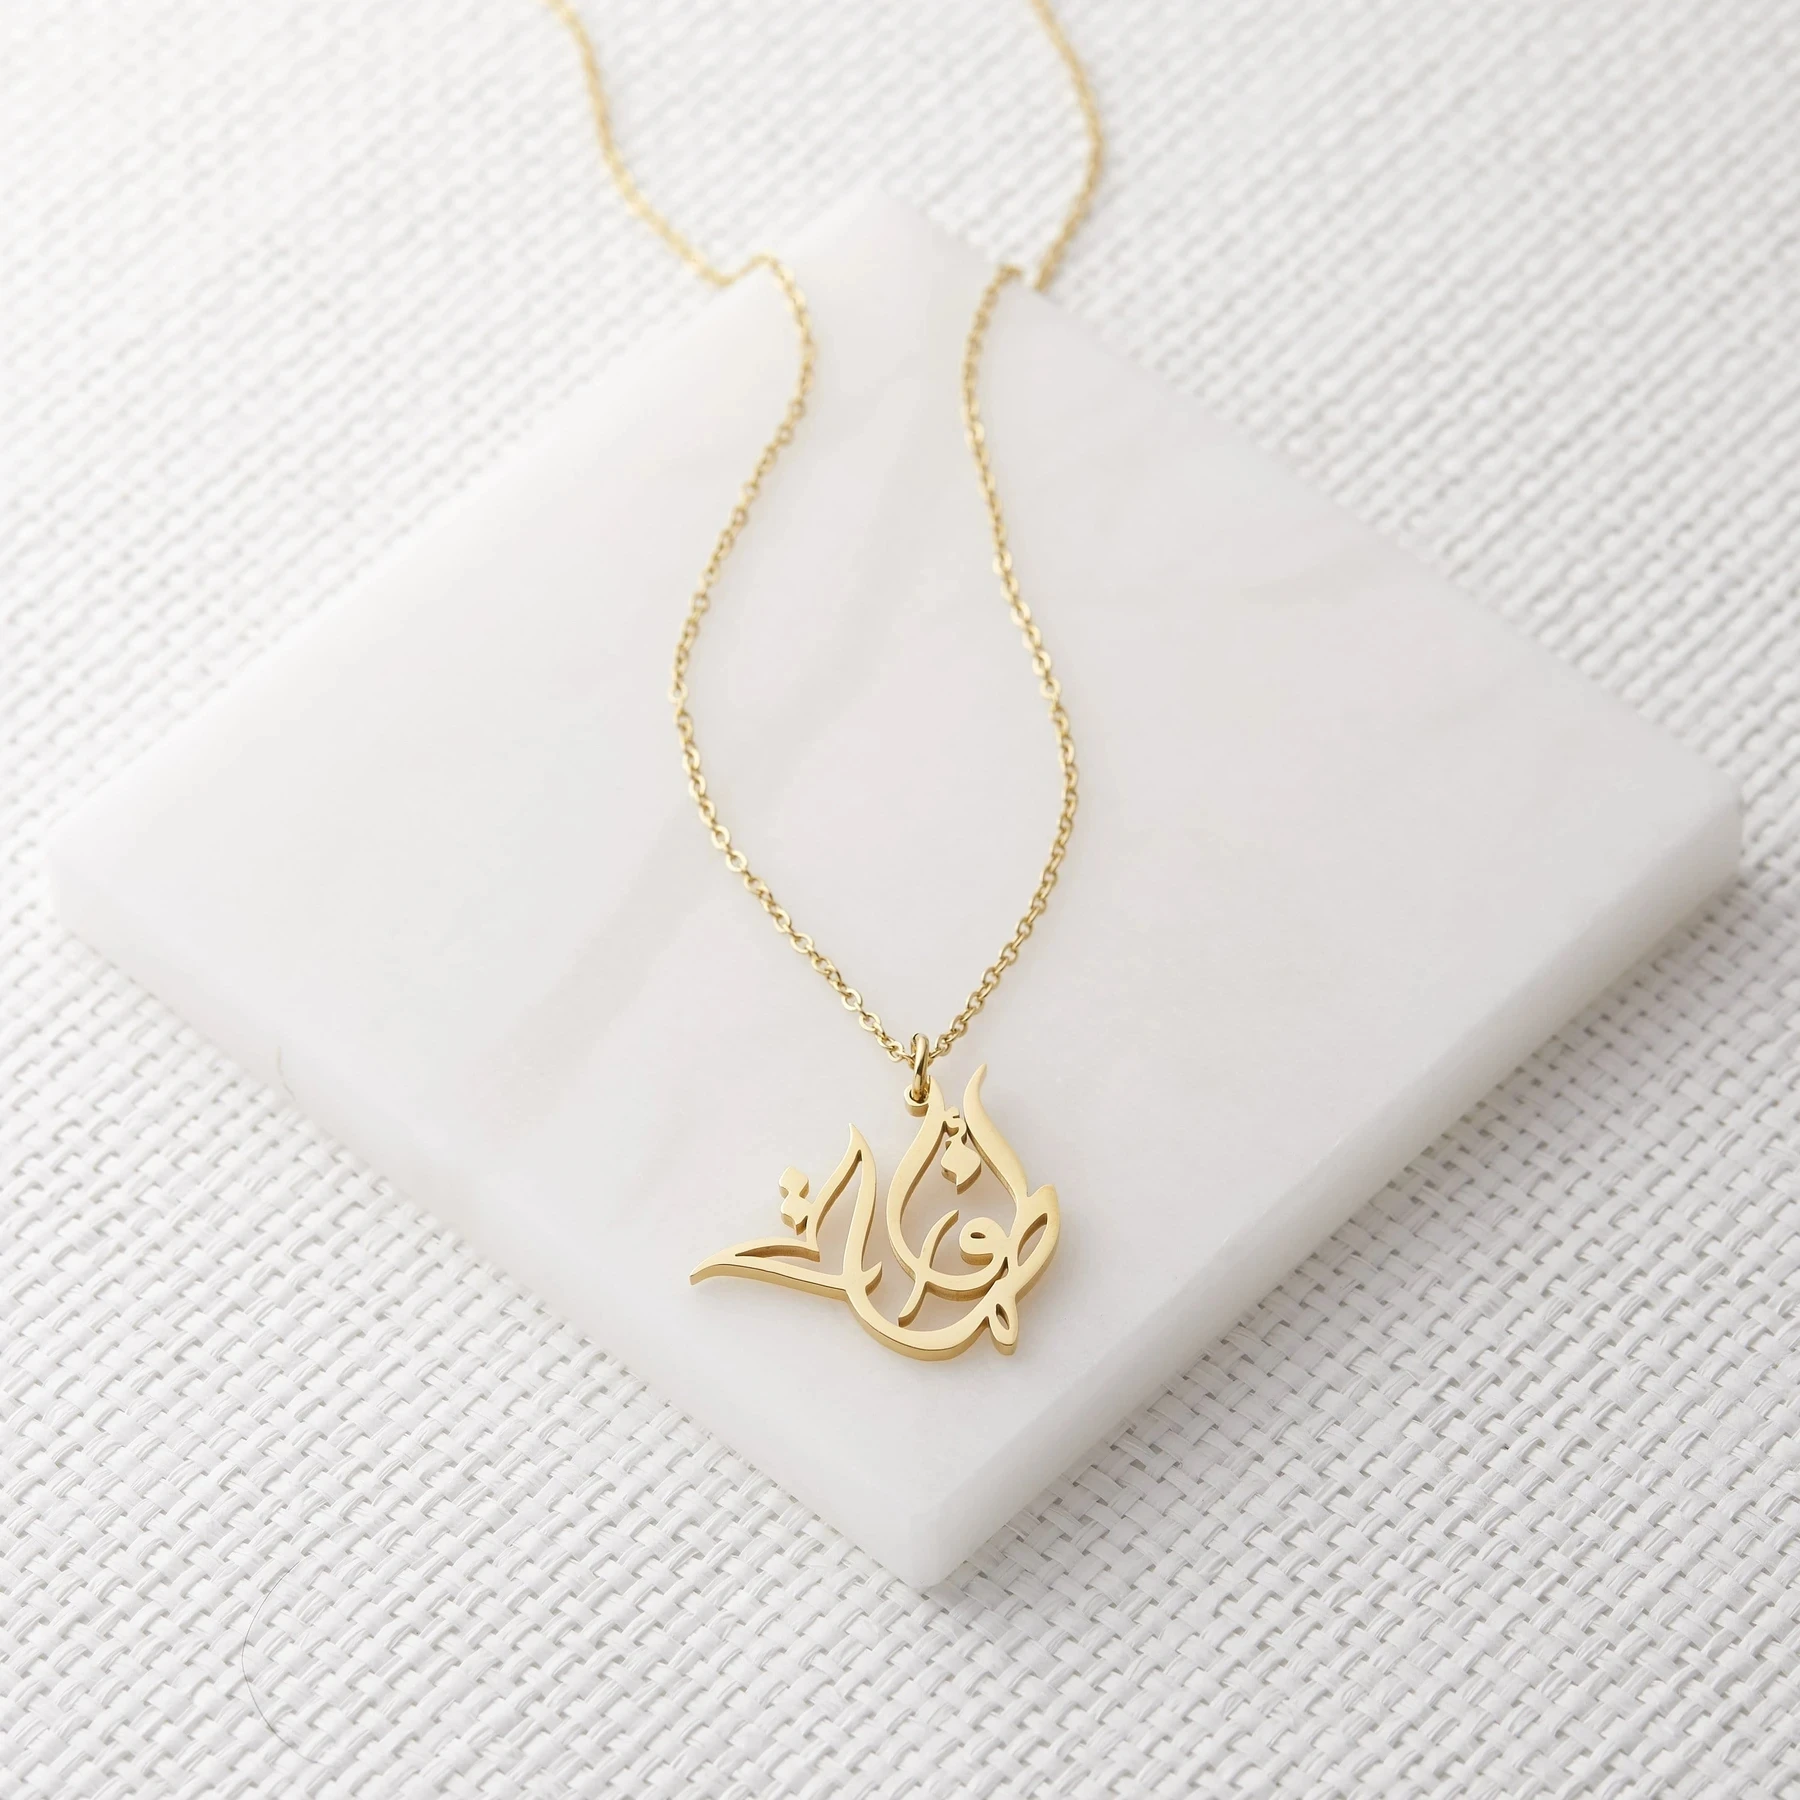 Ready Calligraphy Name Necklcae for Women Gold Stainless Steel Islamic Pendant Personalized Arabic Custom Jewelry Birthday Gift